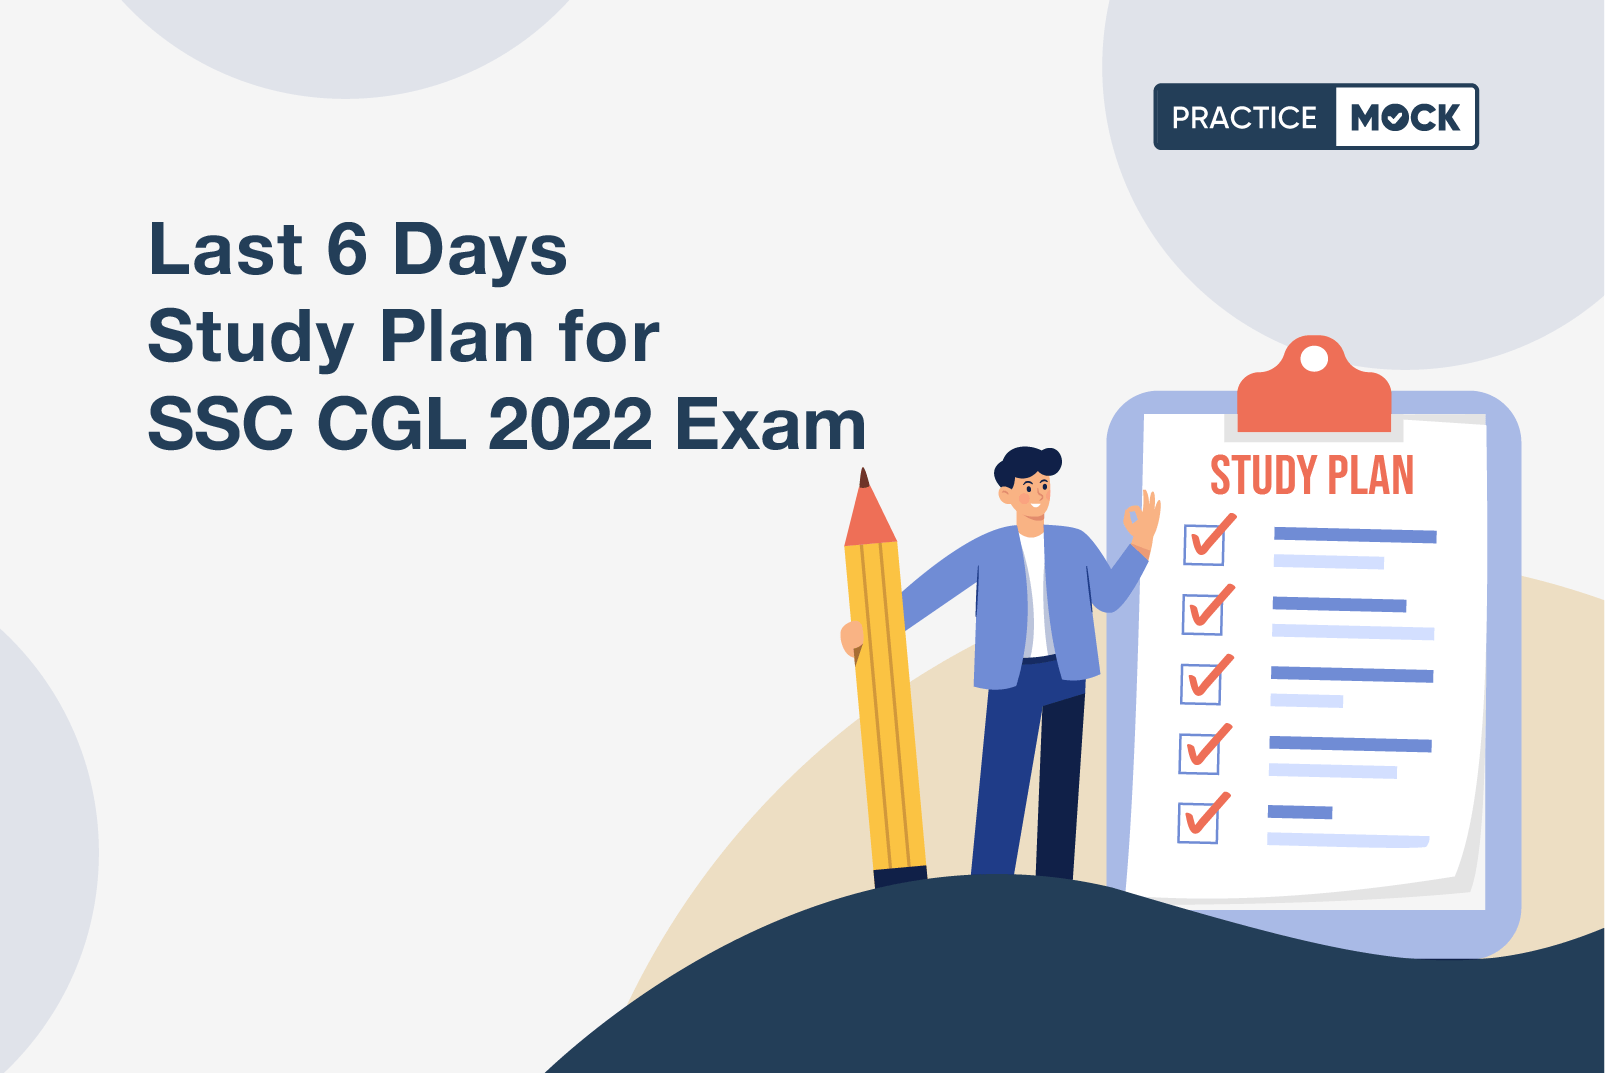 SSC CGL Tier 1 2022 Exam: How to Study & Revise in the last 6 Days?